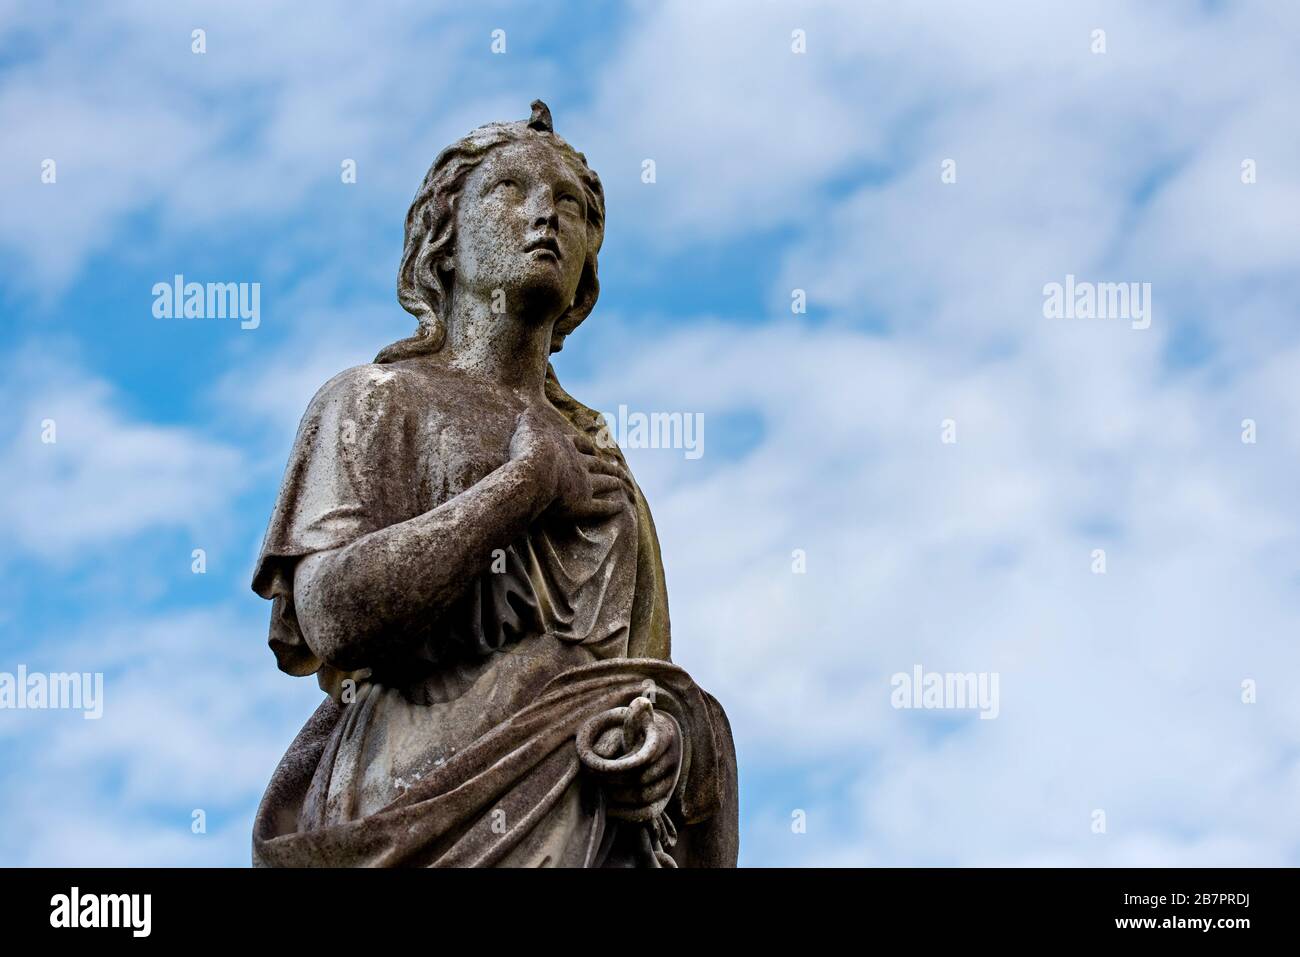 Statue of a woman in mourning looking to the heavens in Morningside Cemetery Edinburgh, Scotland. Stock Photo